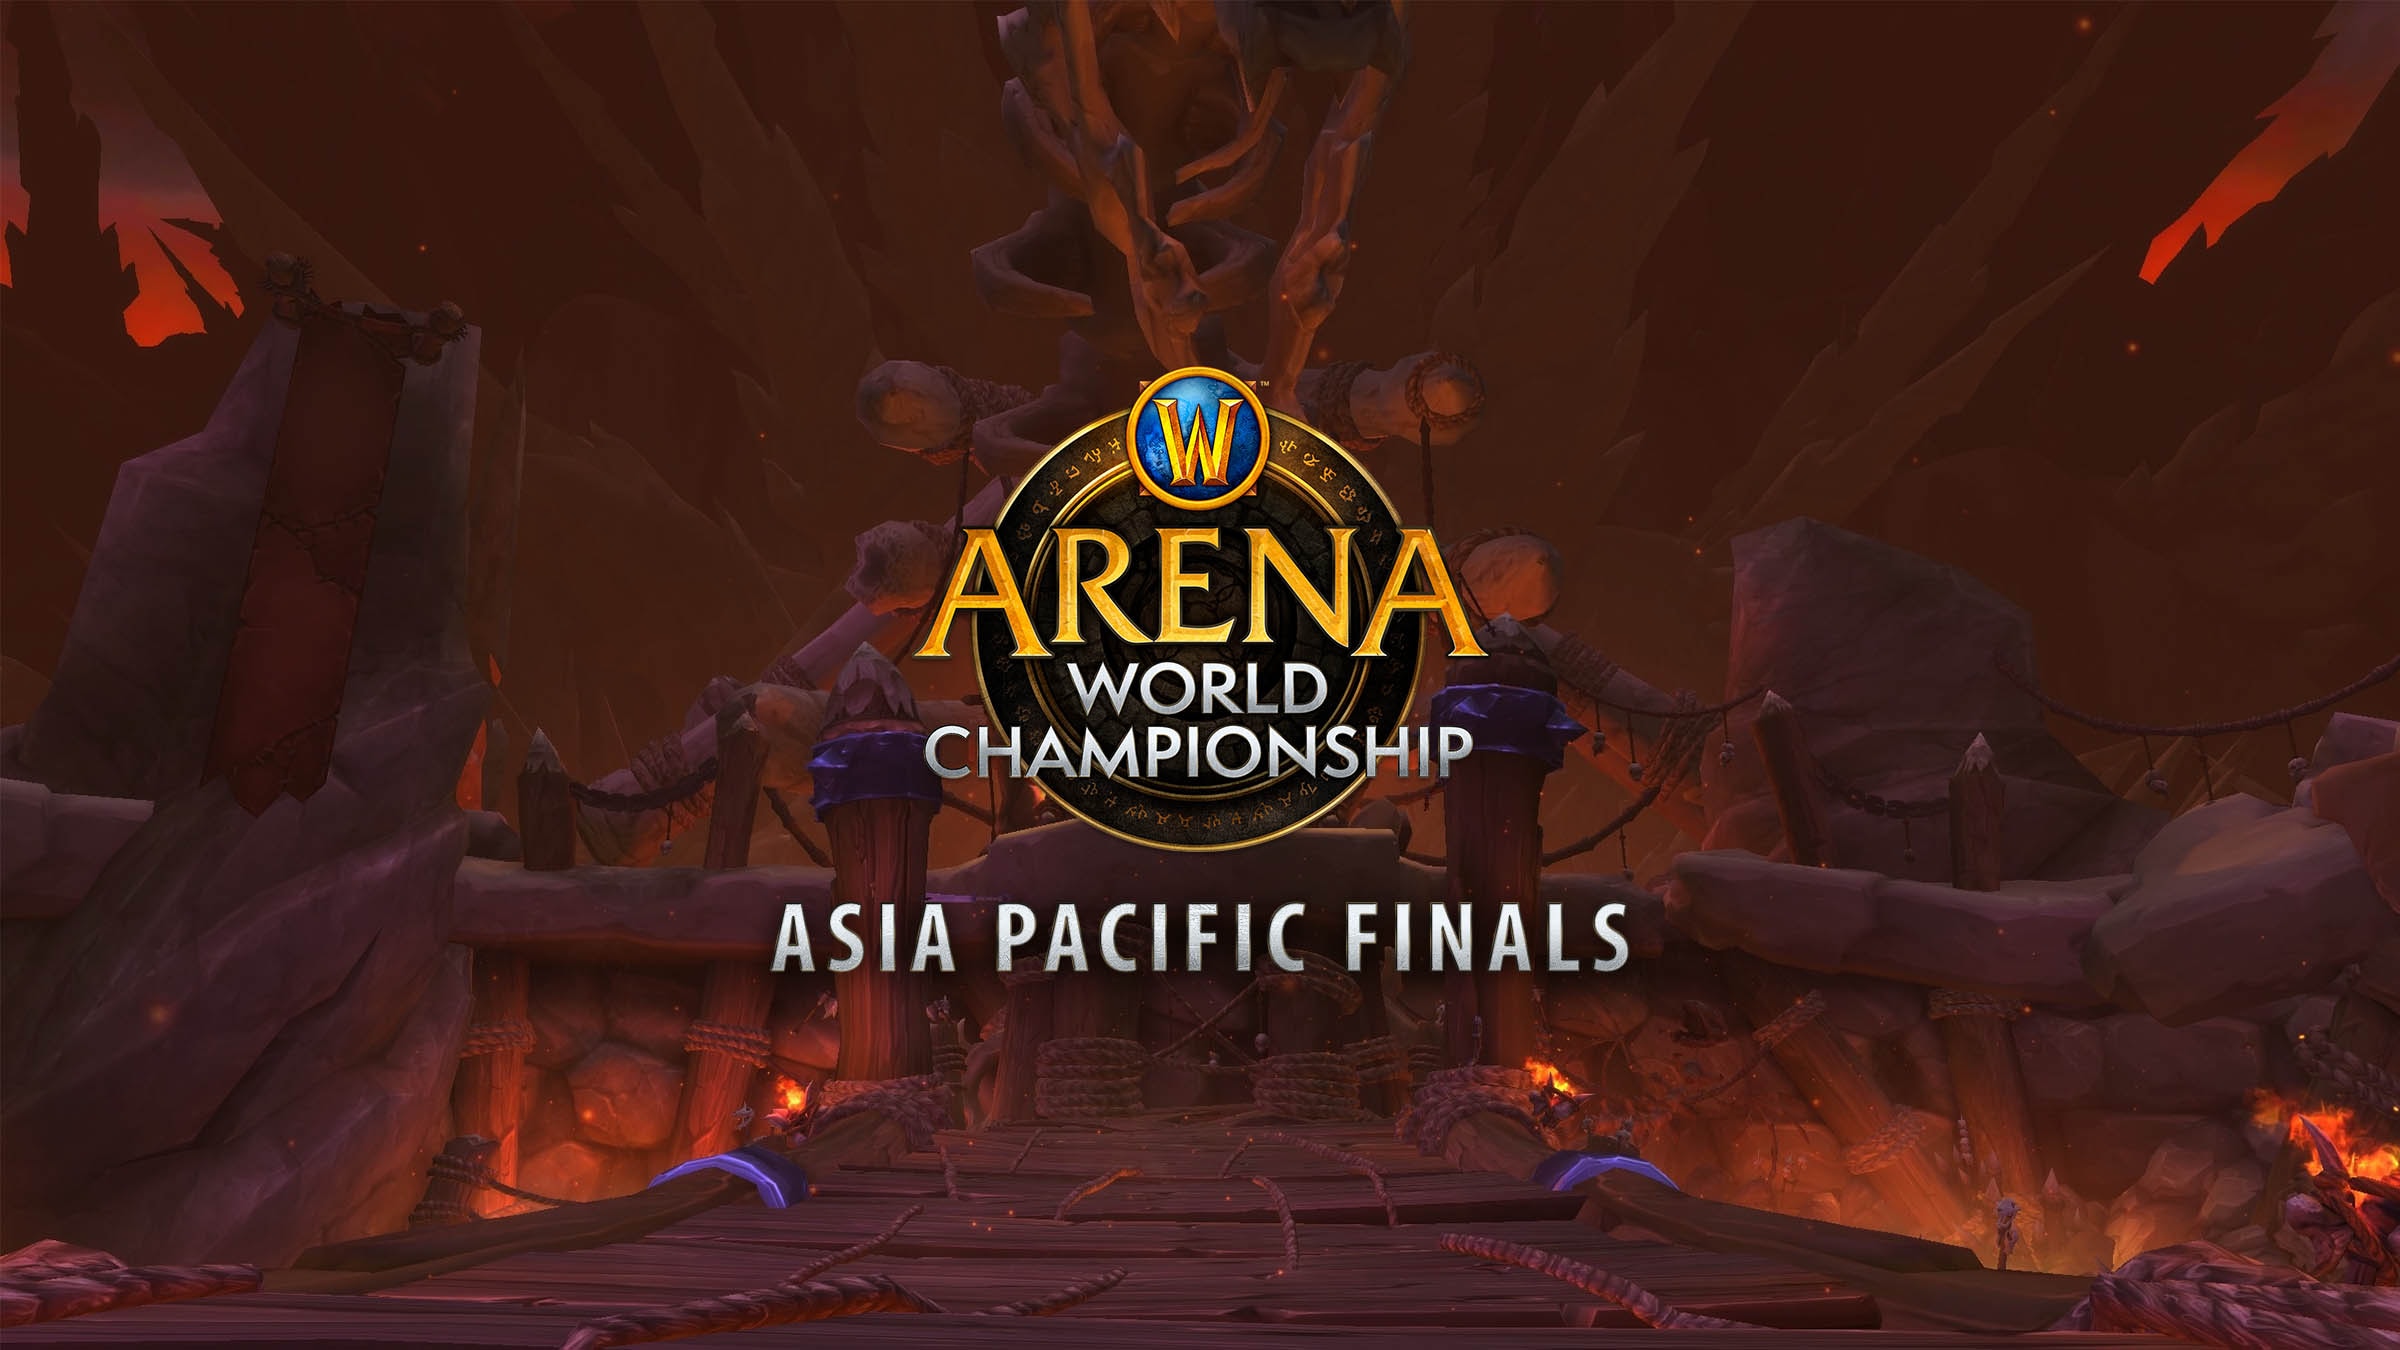 AWC Asia Pacific Finals: Tune In This Weekend